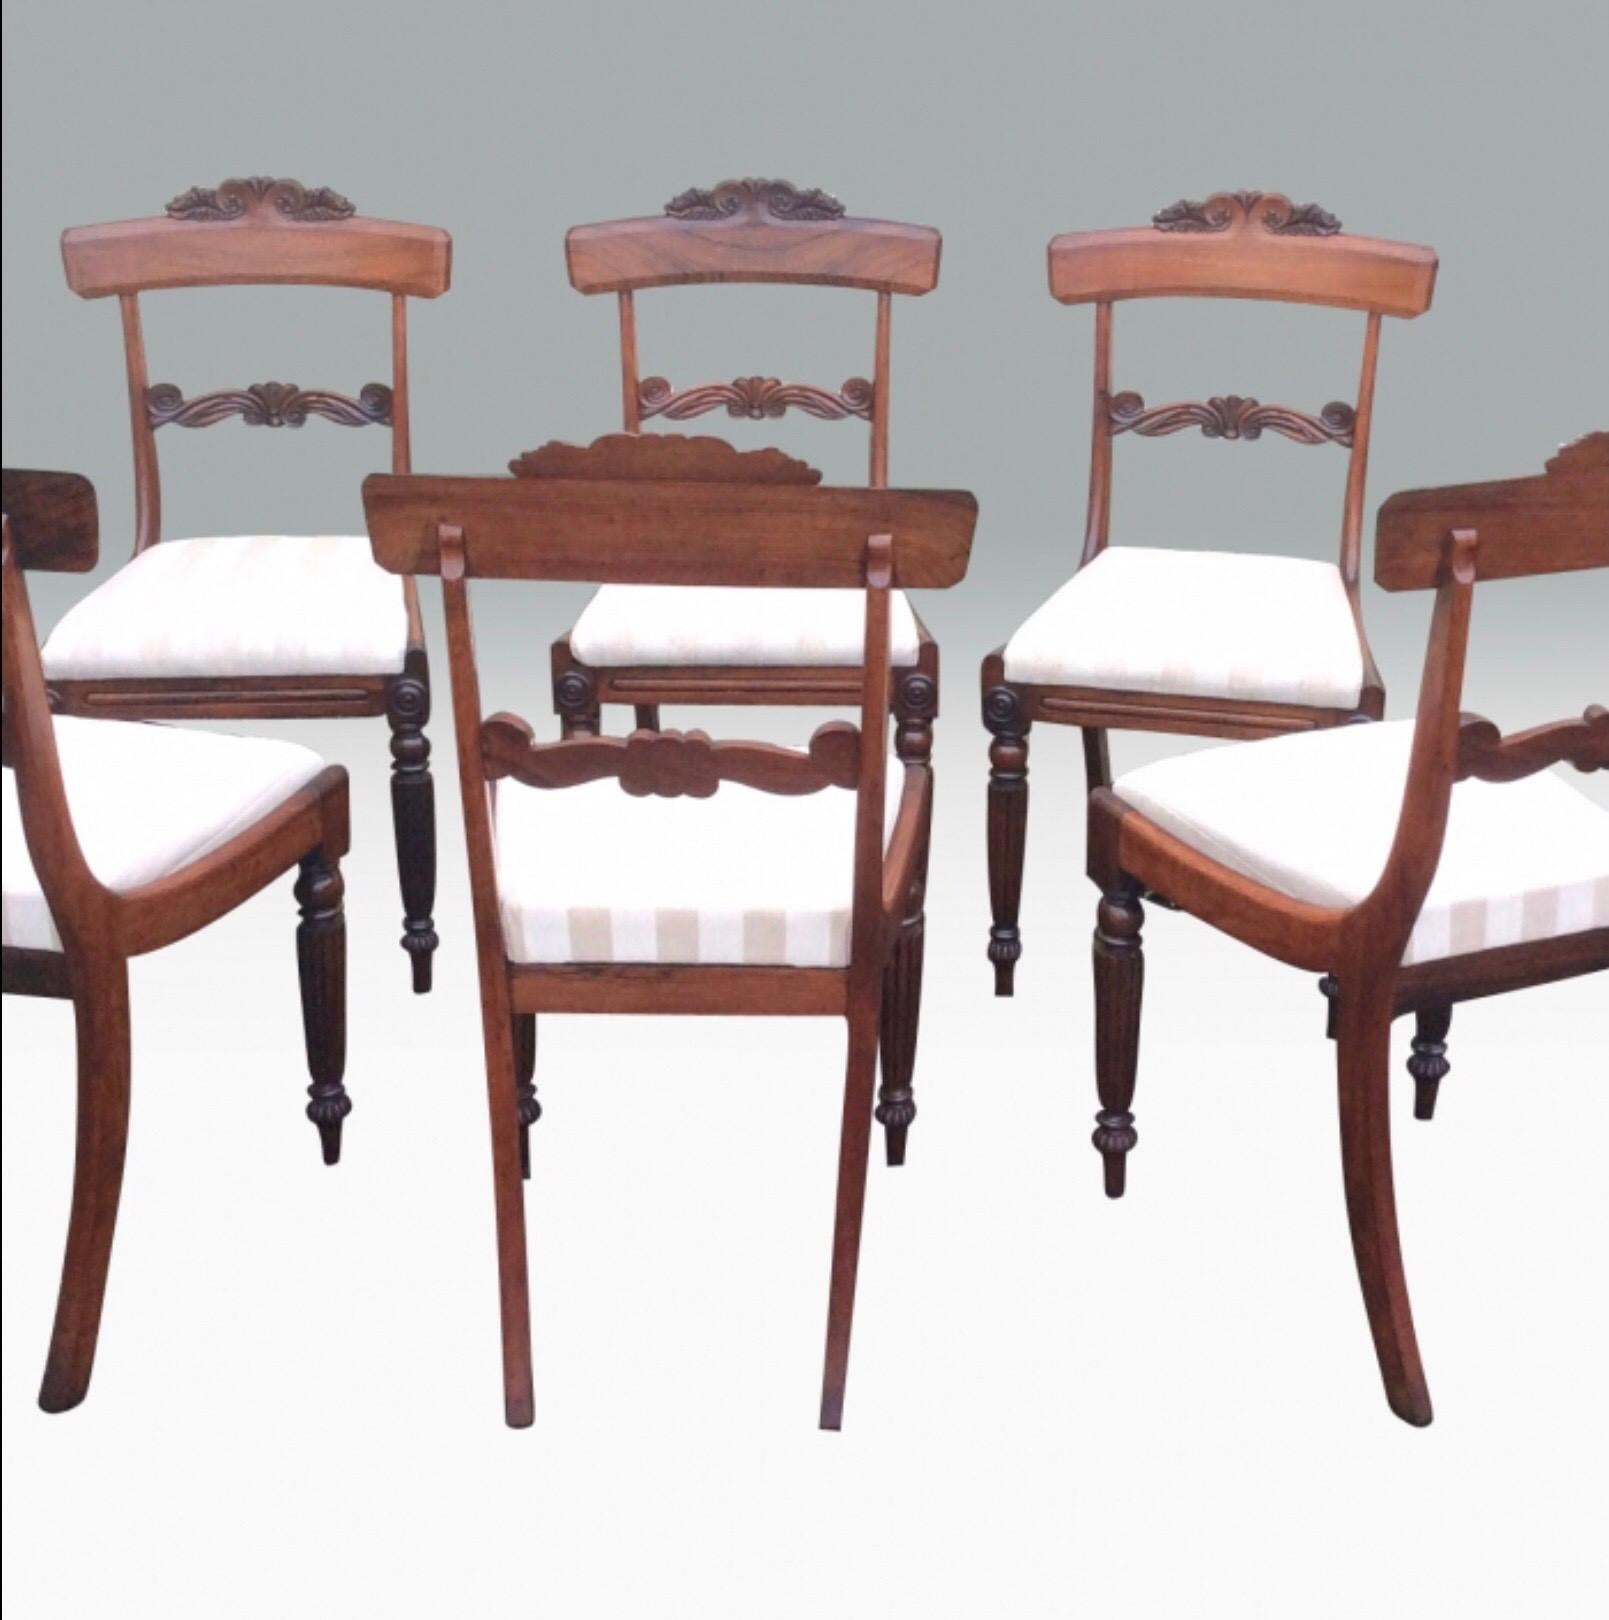 Regency Set of Six Antiqueregency Rosewood Dining Chairs For Sale